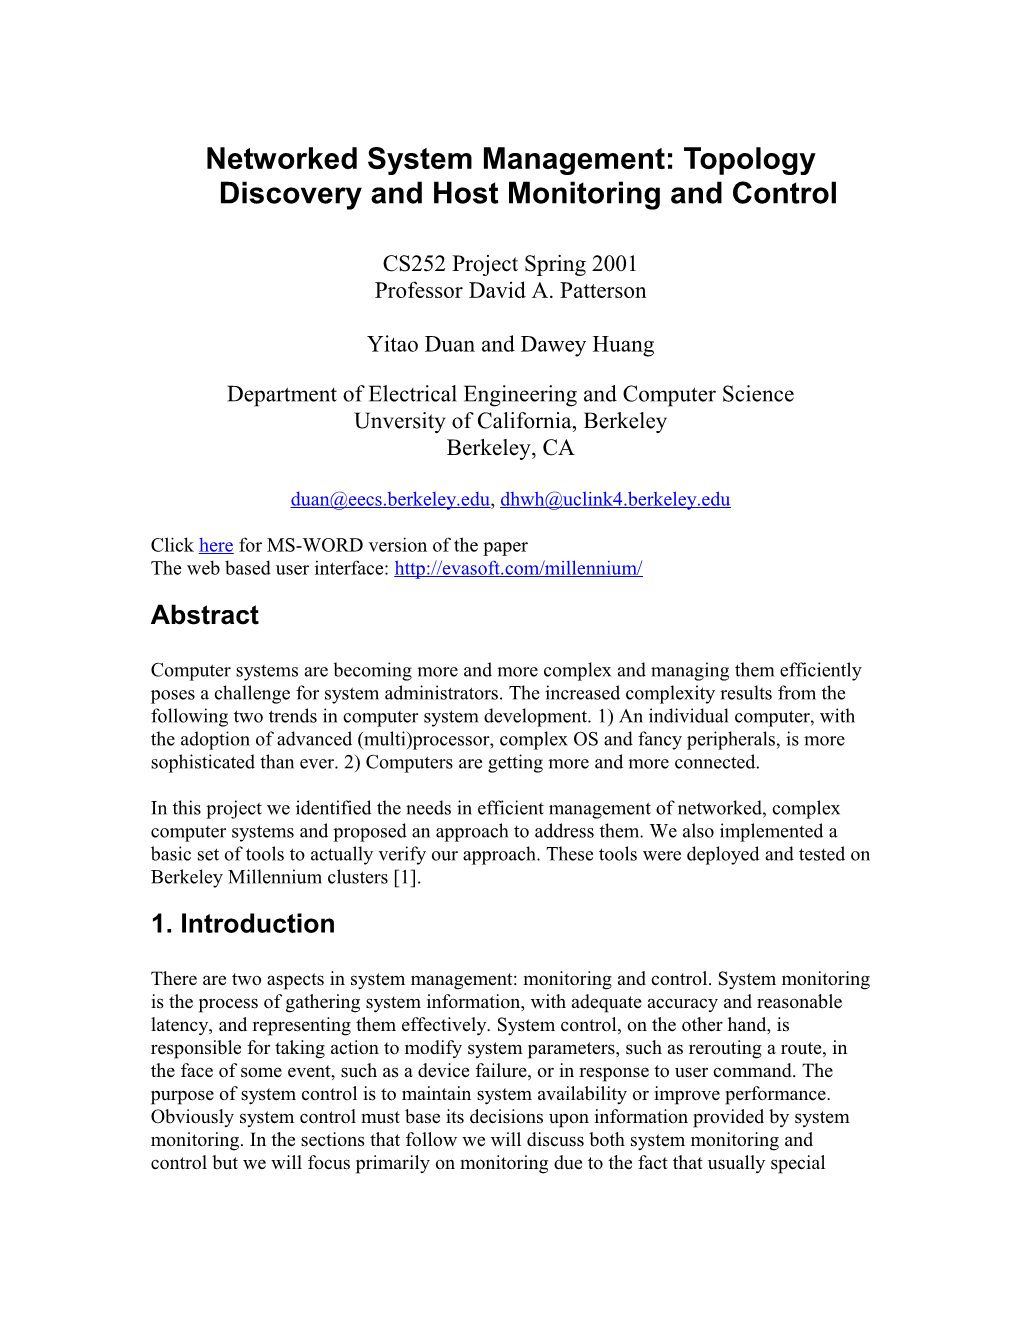 System and Network Discovery and Management